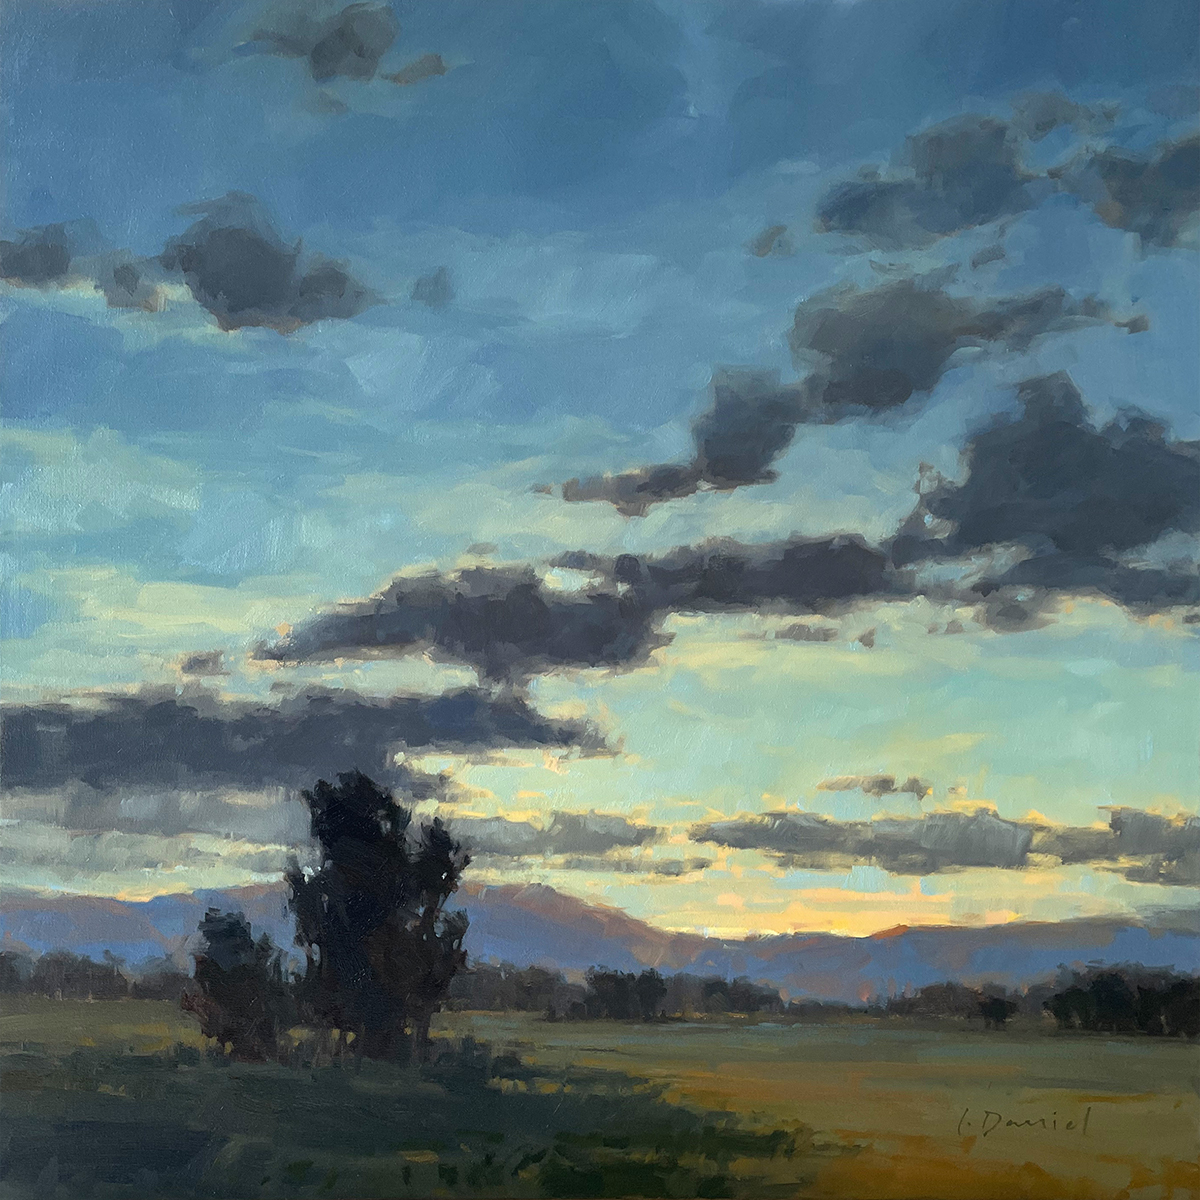 oil painting of sunset sky, almost at dark over a field with trees and mountains in the distance